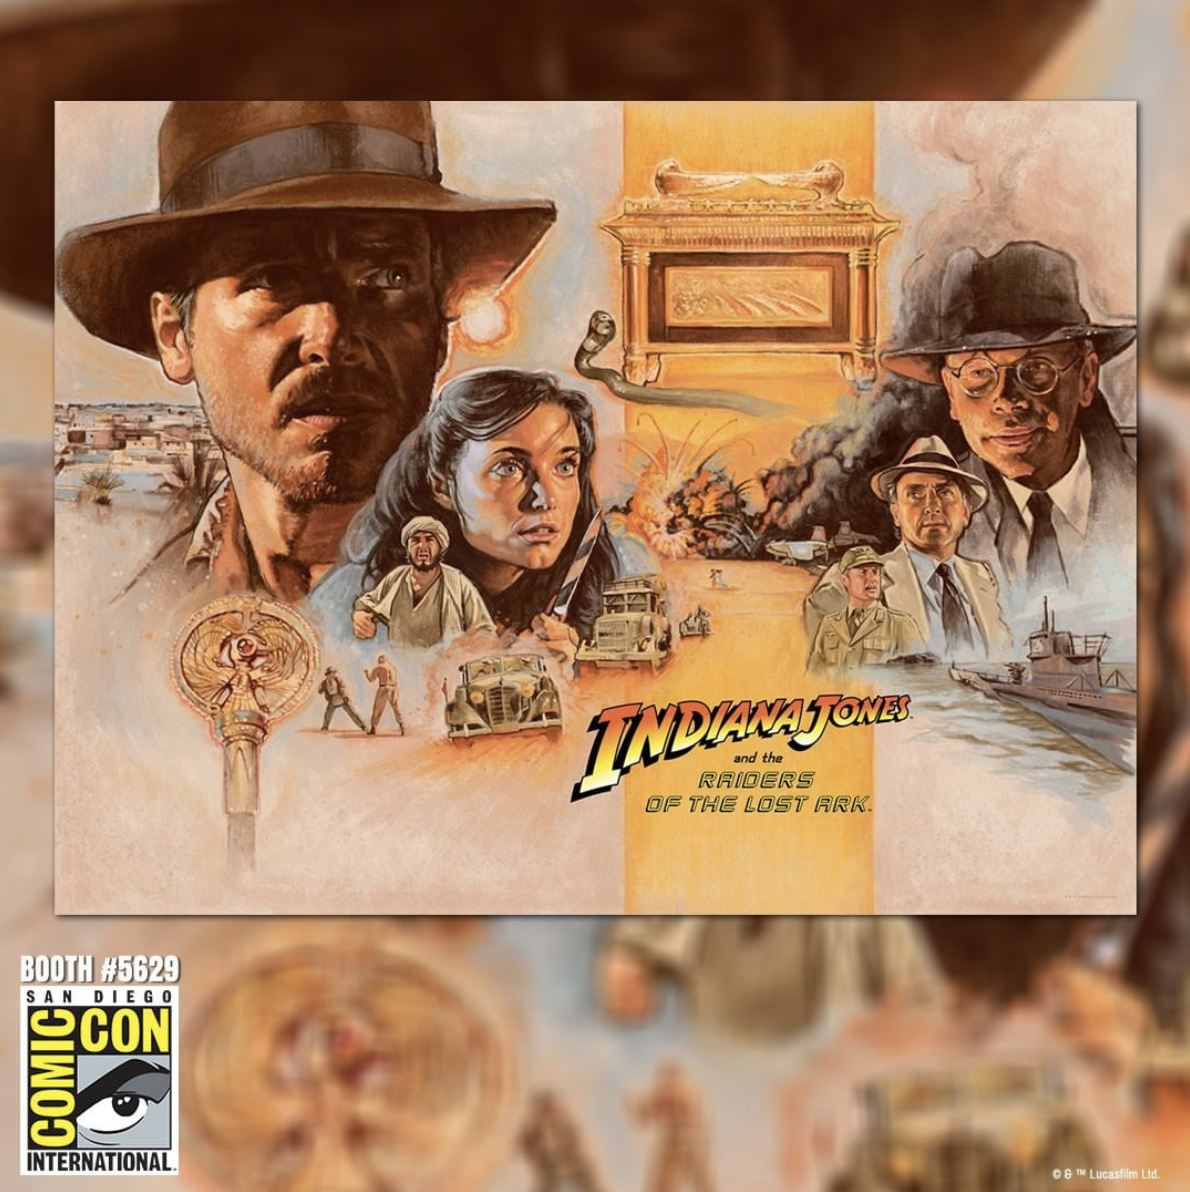 The Ultimate Adventure – Official Indiana Jones poster